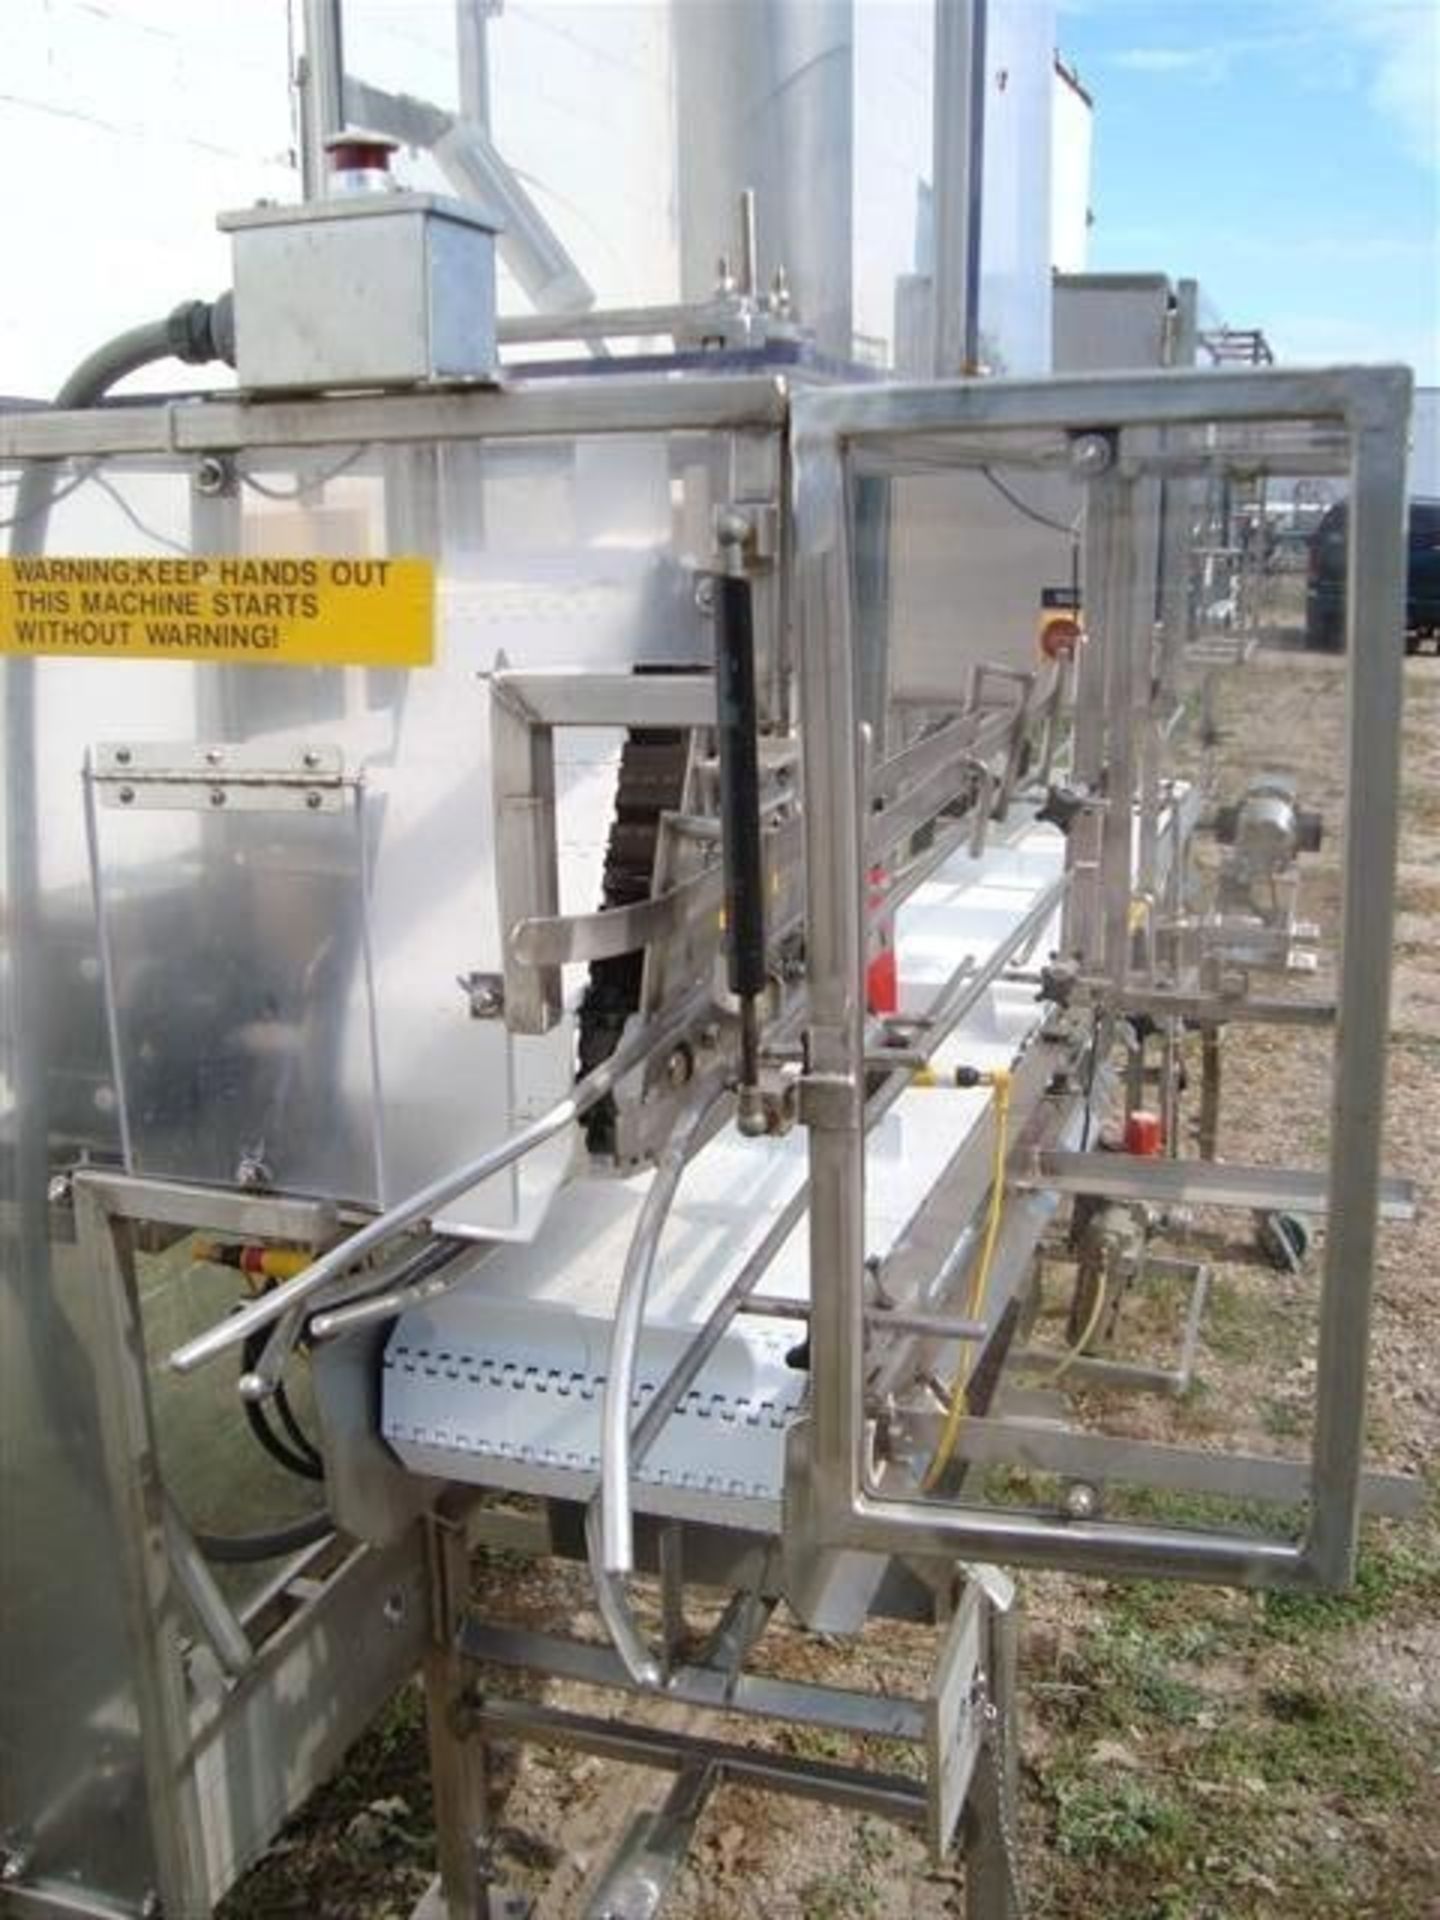 Food Process Systems S/S Sanitary Box Filler, Model 6000, S/N 145702 with Allen Bradley Ultra 3000 - Image 11 of 12